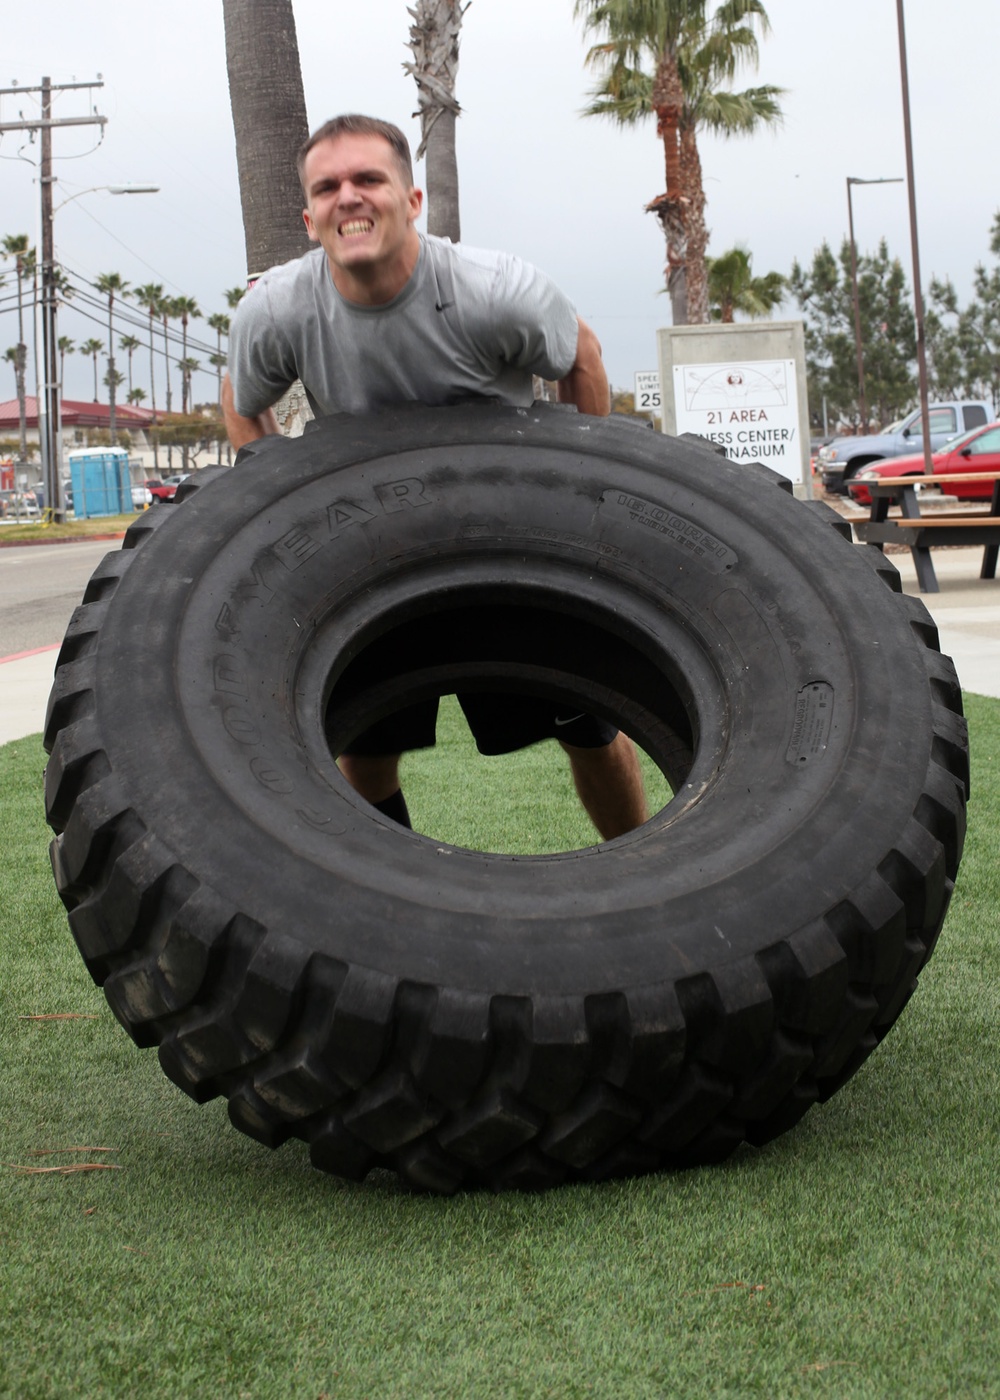 MCCS hosts fitness challenge for Marines